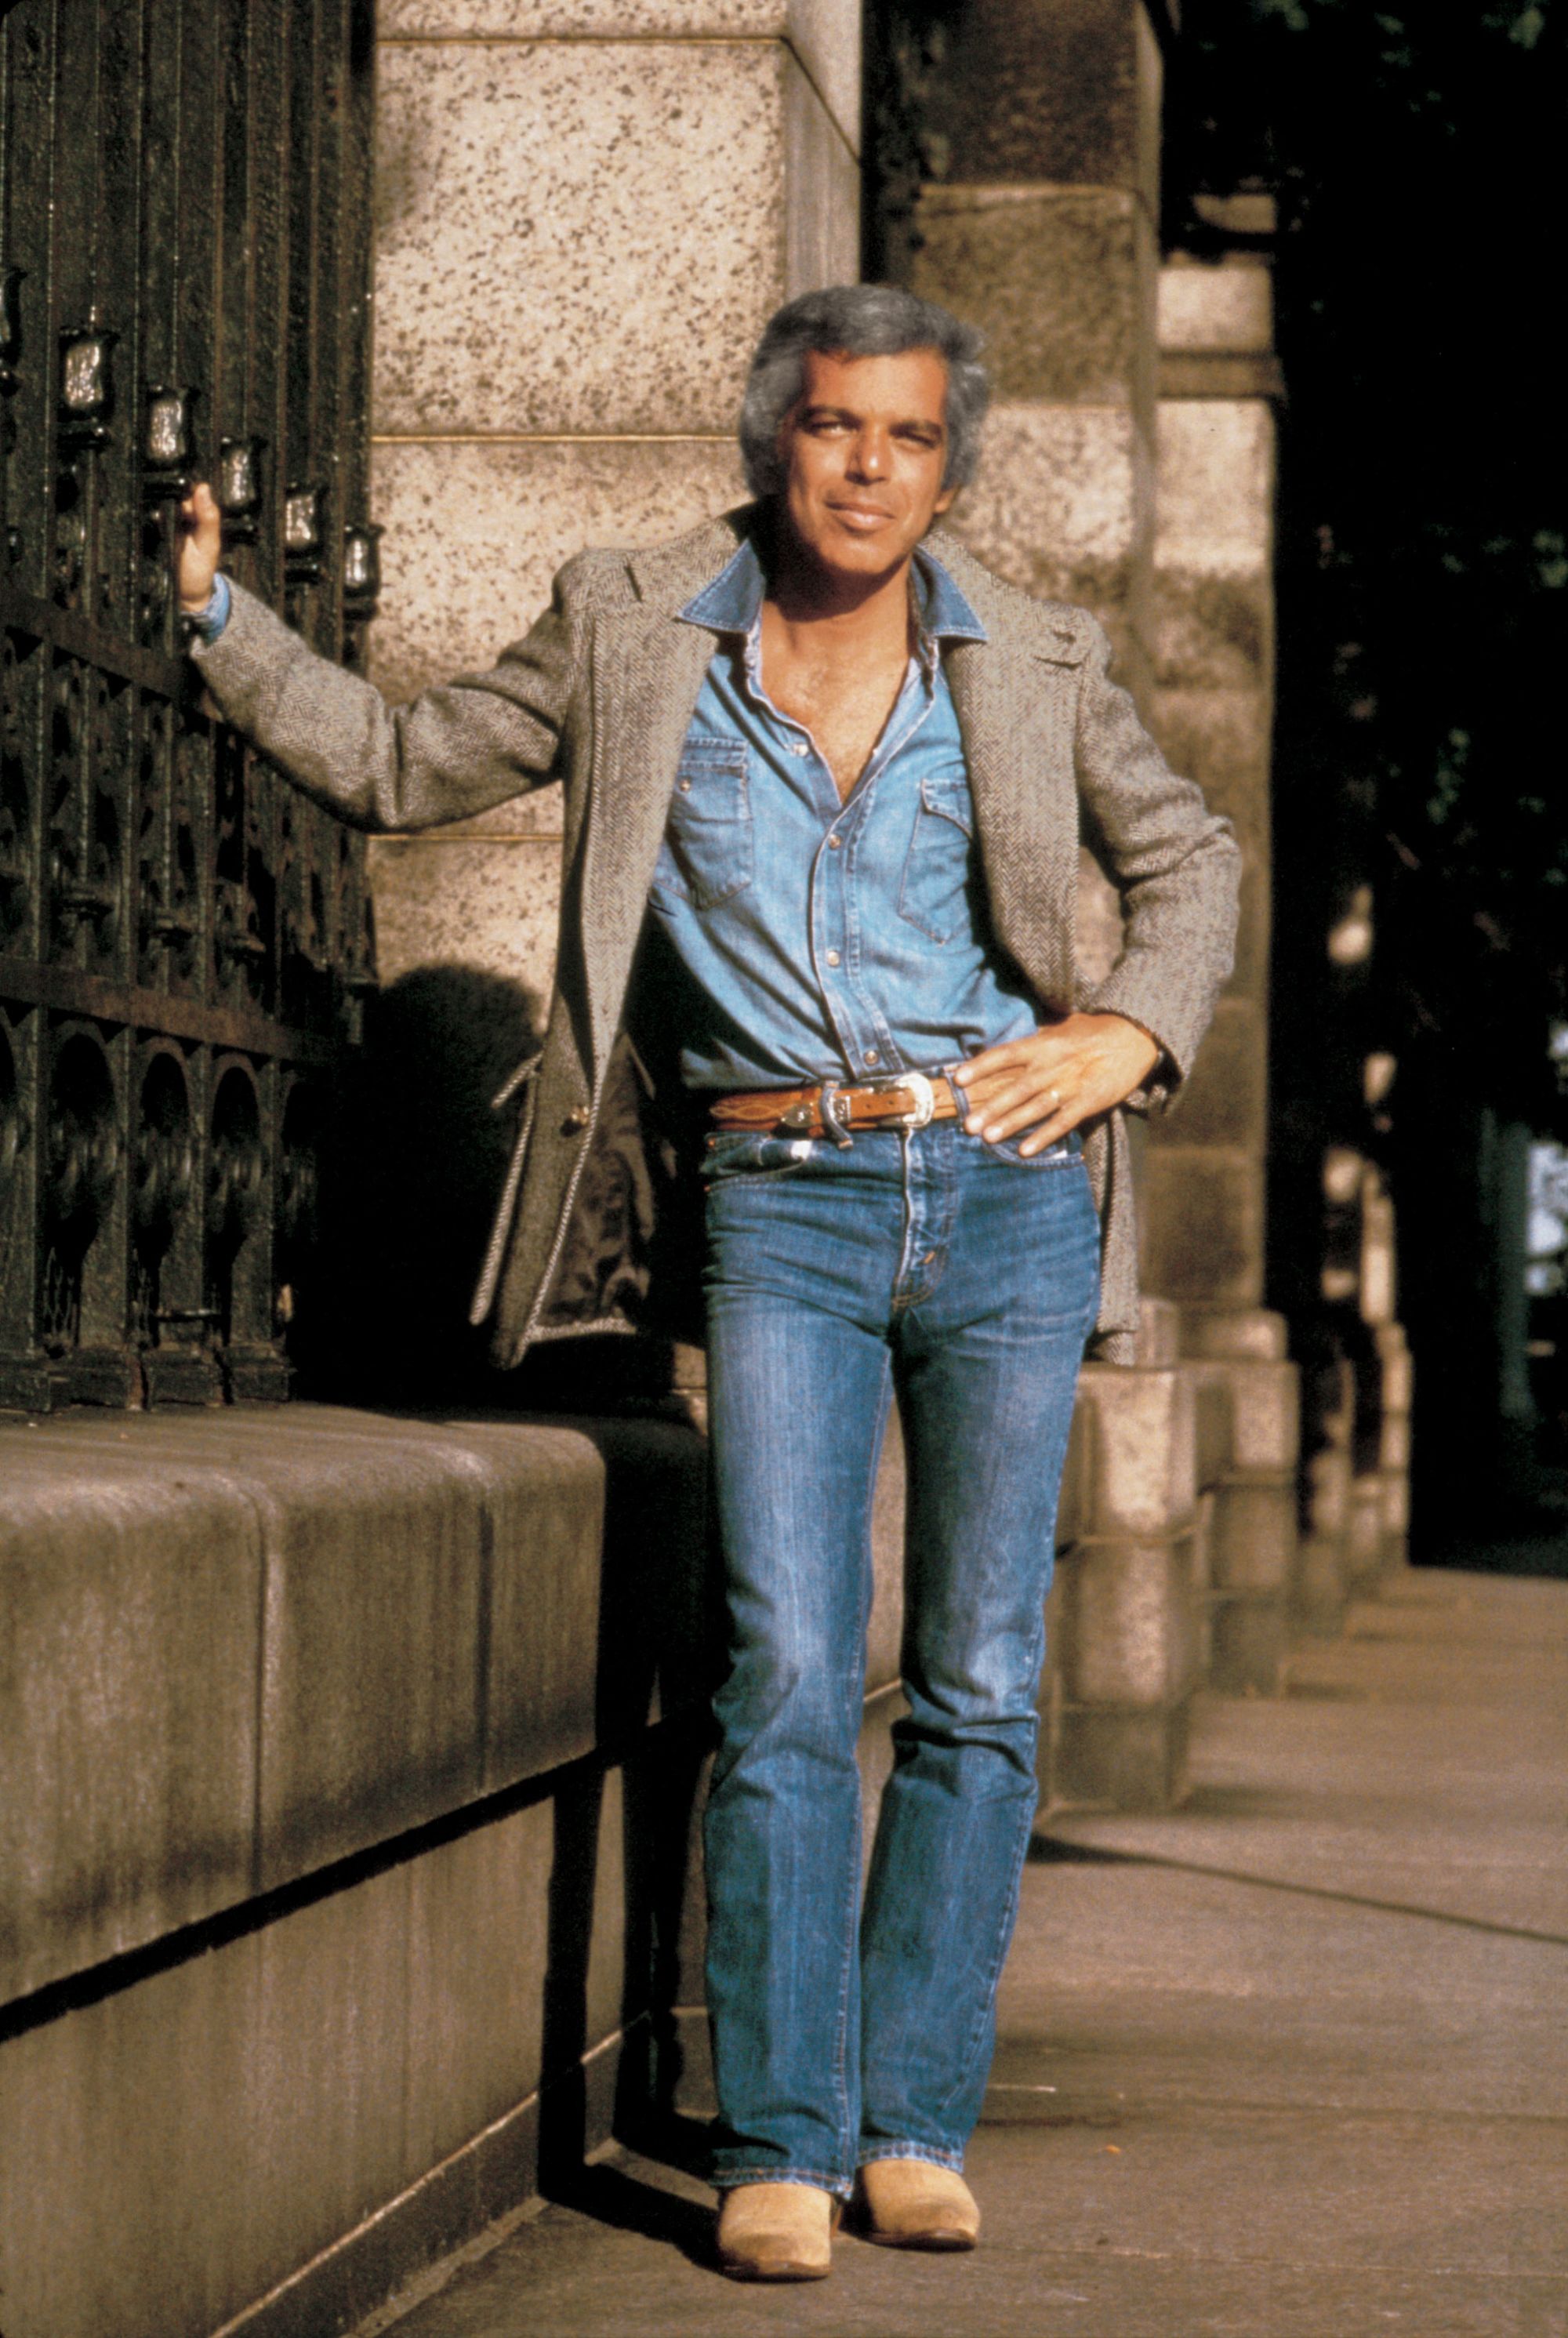 Ralph Lauren on X: The landscape of men's fashion, as defined by